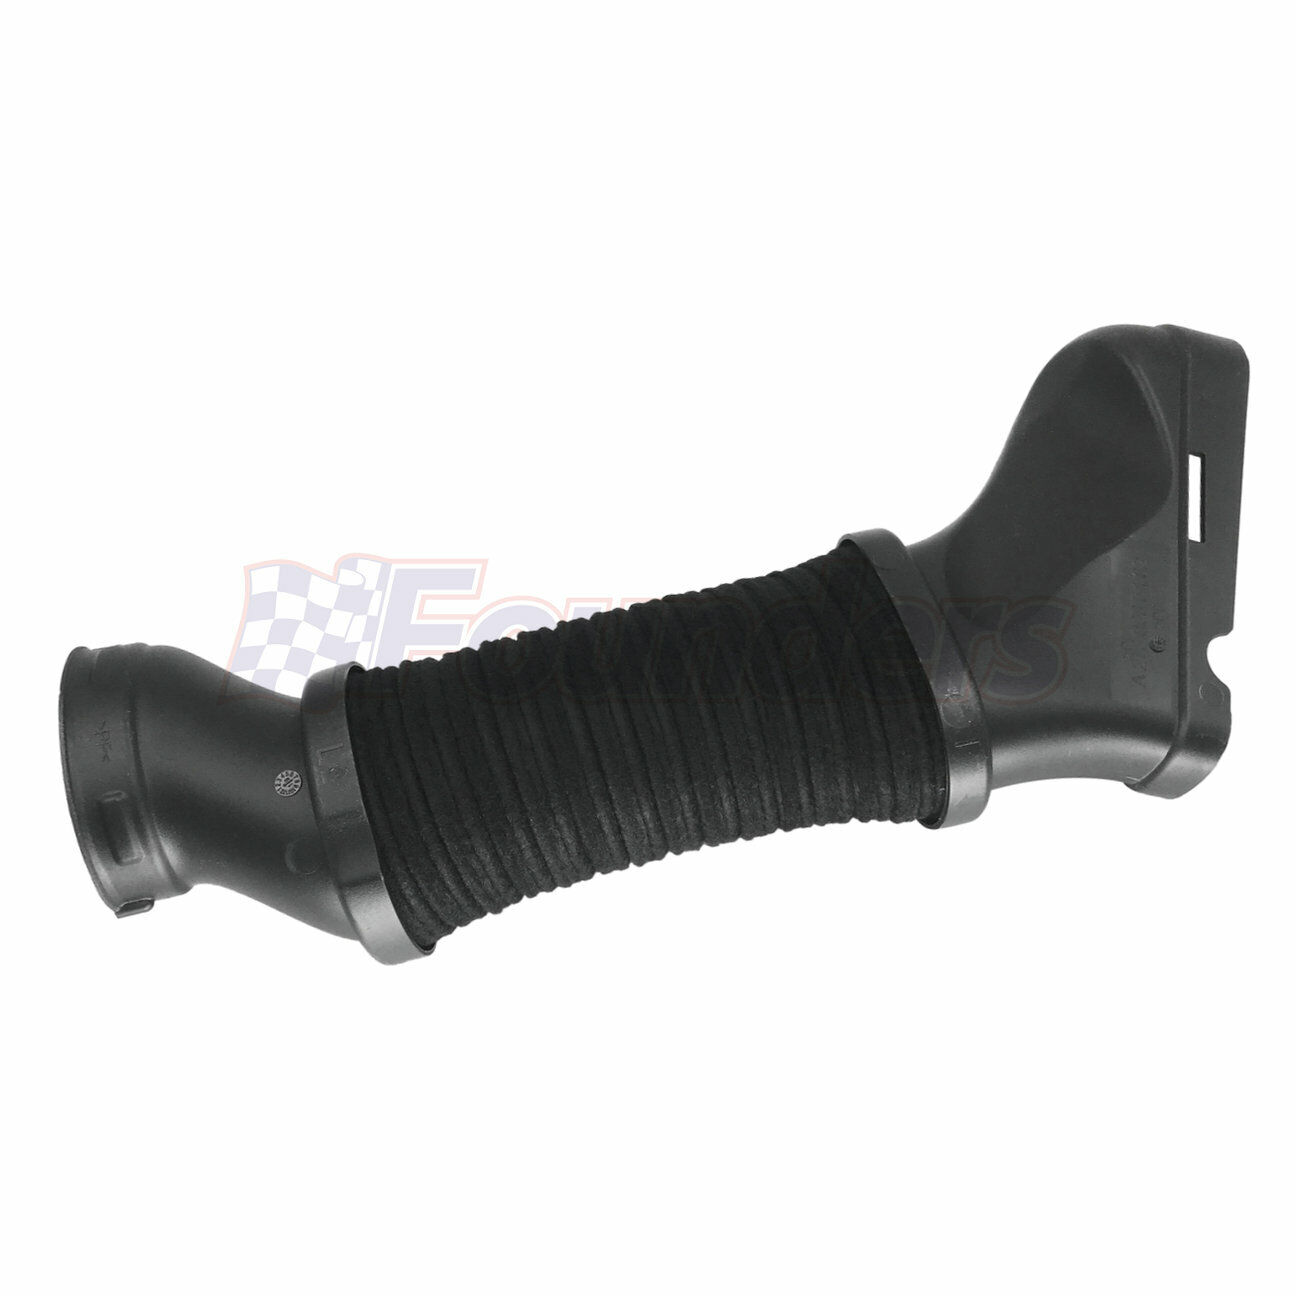 Left Air Cleaner Intake-inlet Duct Hose for Mercedes-Benz E550 E63 AMG S CLS550